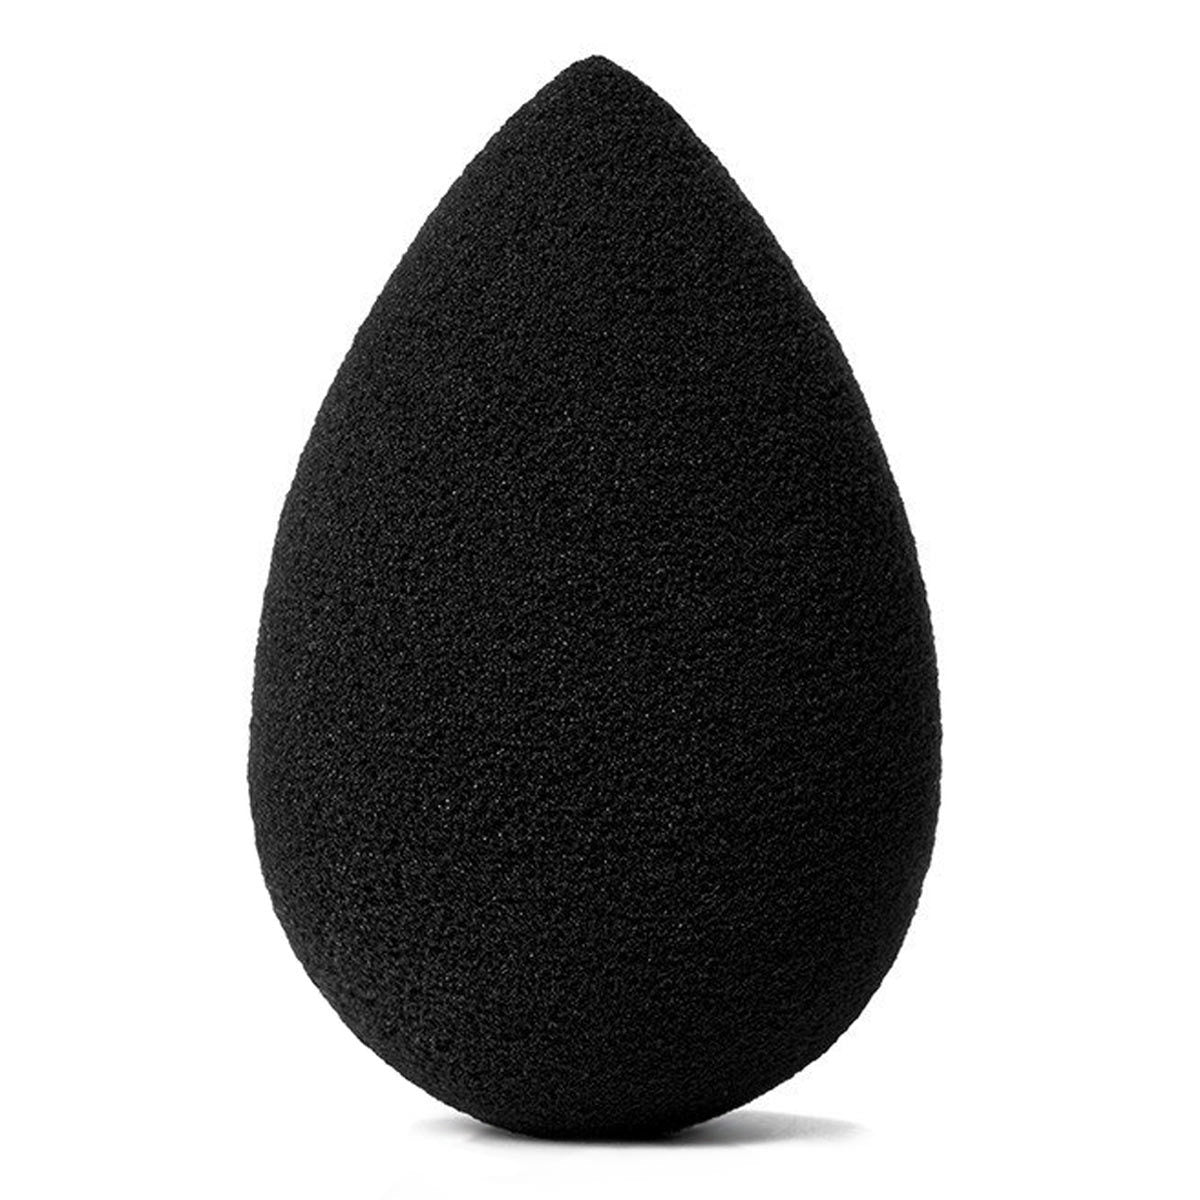 Primary image of Beautyblender Pro